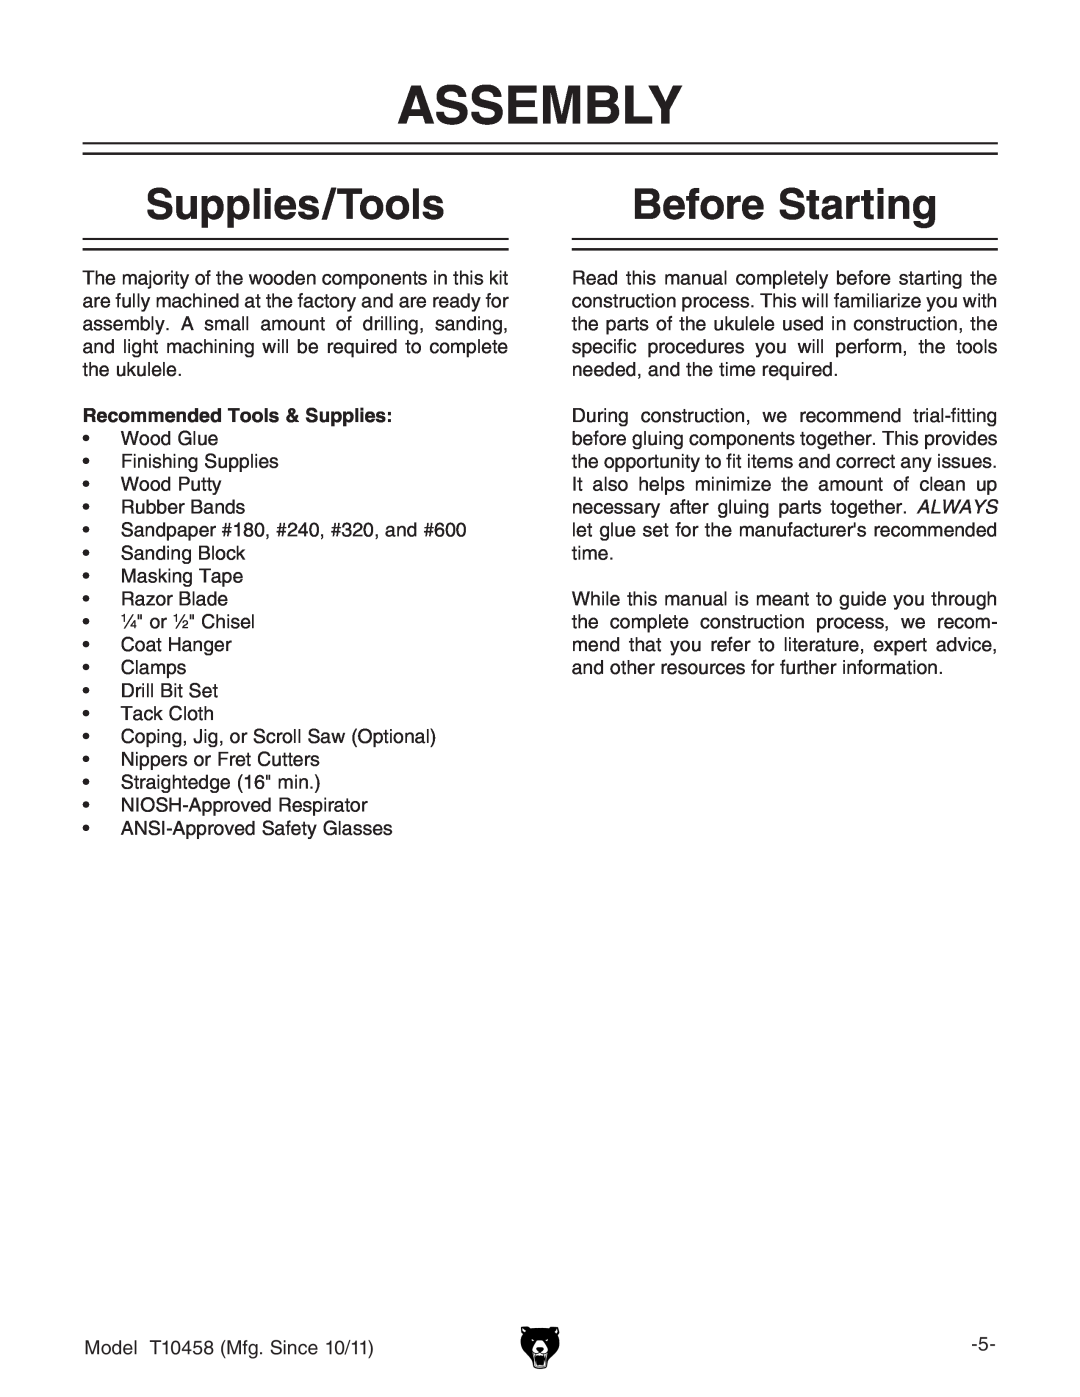 Grizzly T10458 instruction manual Assembly, Supplies/Tools, Before Starting, Recommended Tools & Supplies 